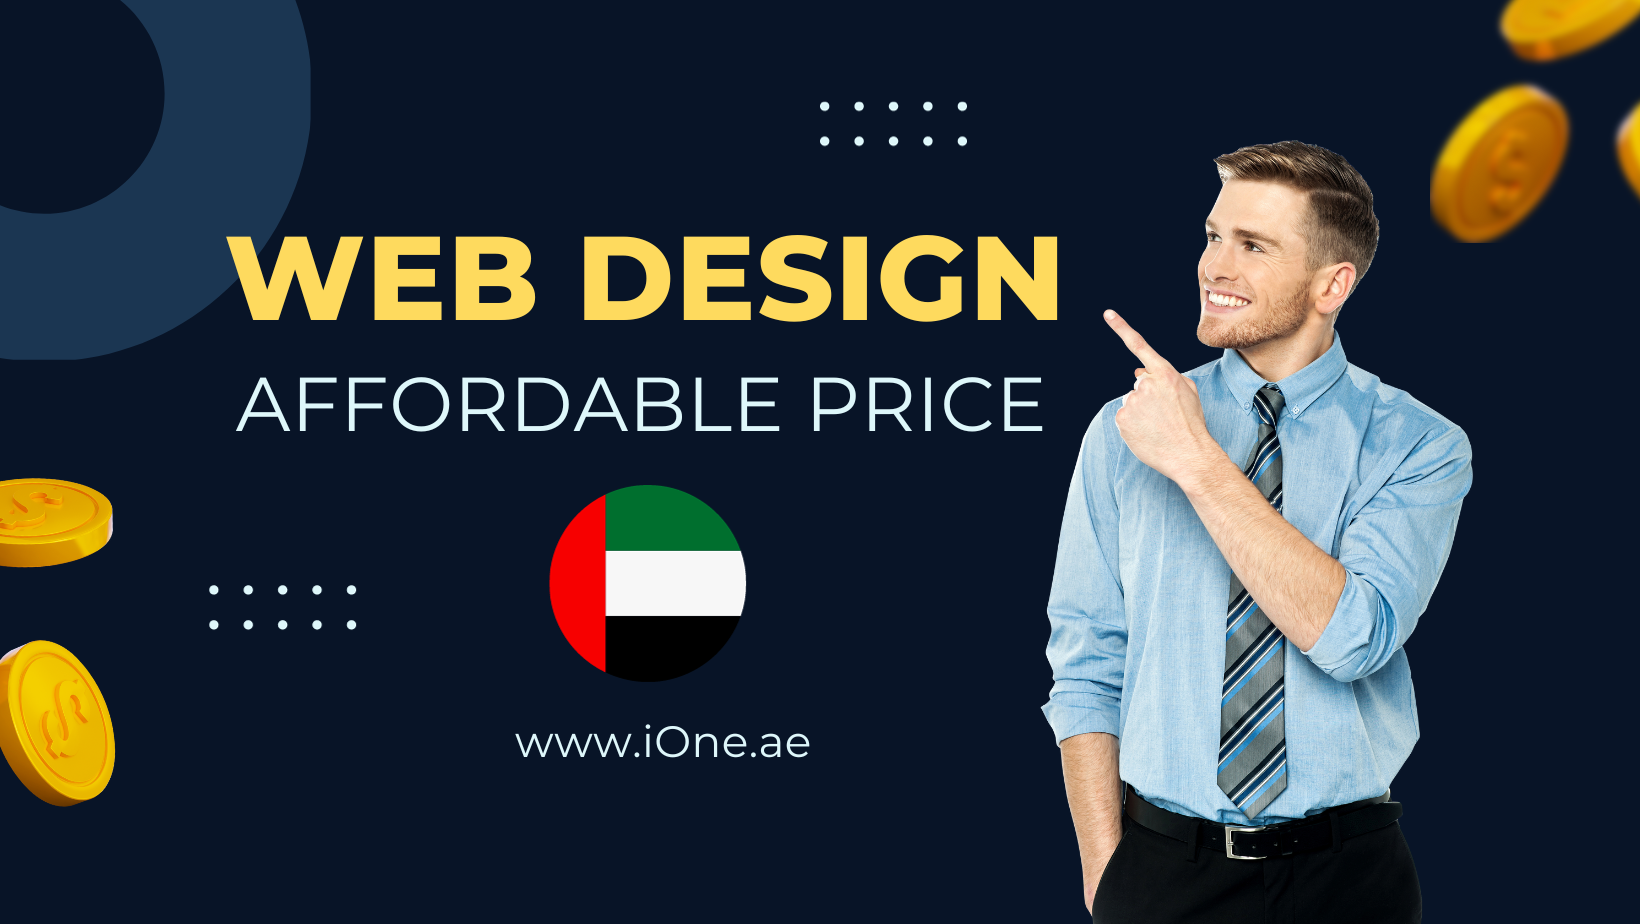 Website Design Affordable Price and Low Cost : Best Website Design Company in Abu Dhabi : Unlocking Your Online Potential : Affordable and Quality Web Design Services in Abu Dhabi, UAE